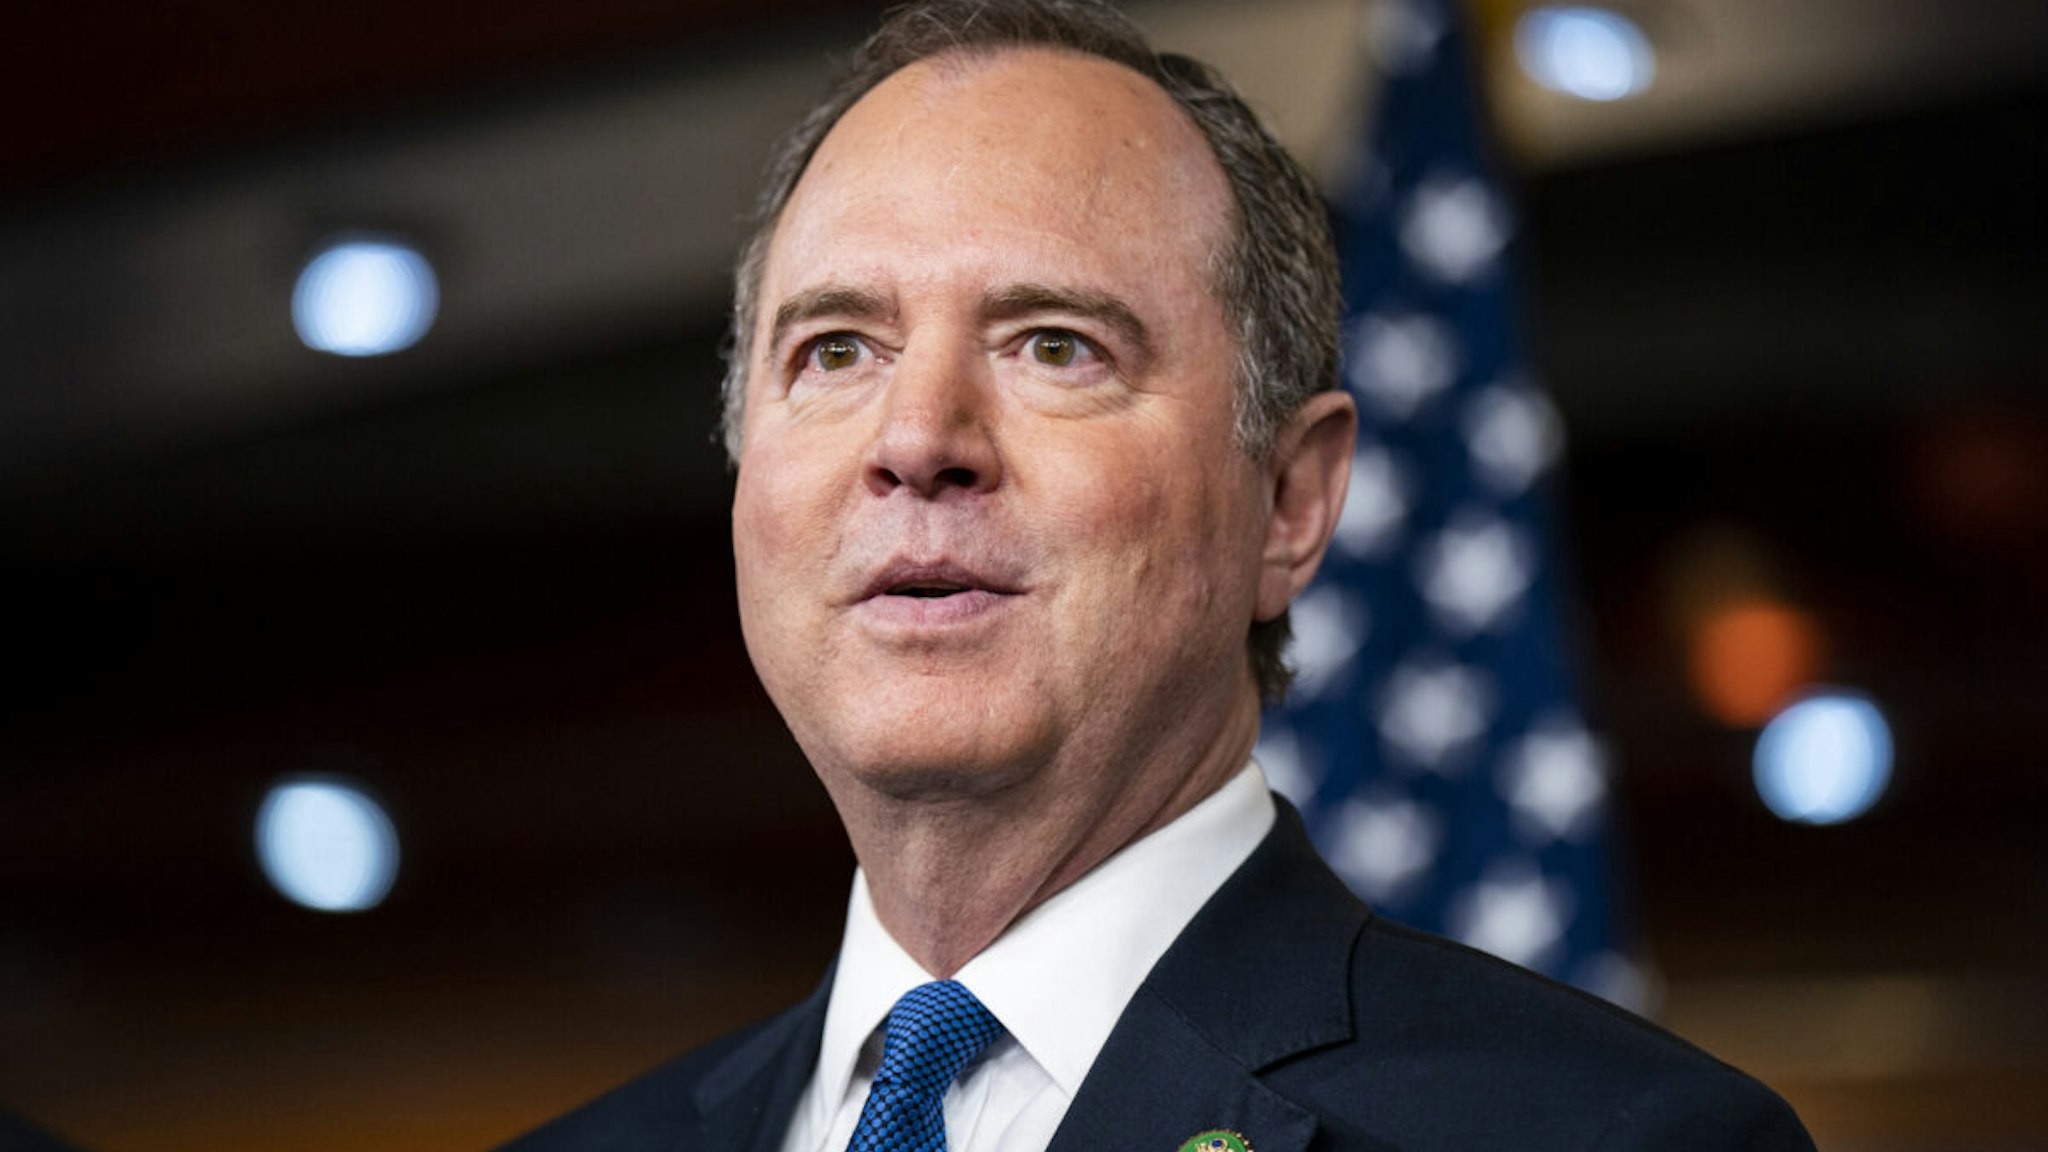 Representative Adam Schiff, a Democrat from California, speaks during a news conference at the US Capitol in Washington, DC, US, on Wednesday, Jan. 25, 2023.